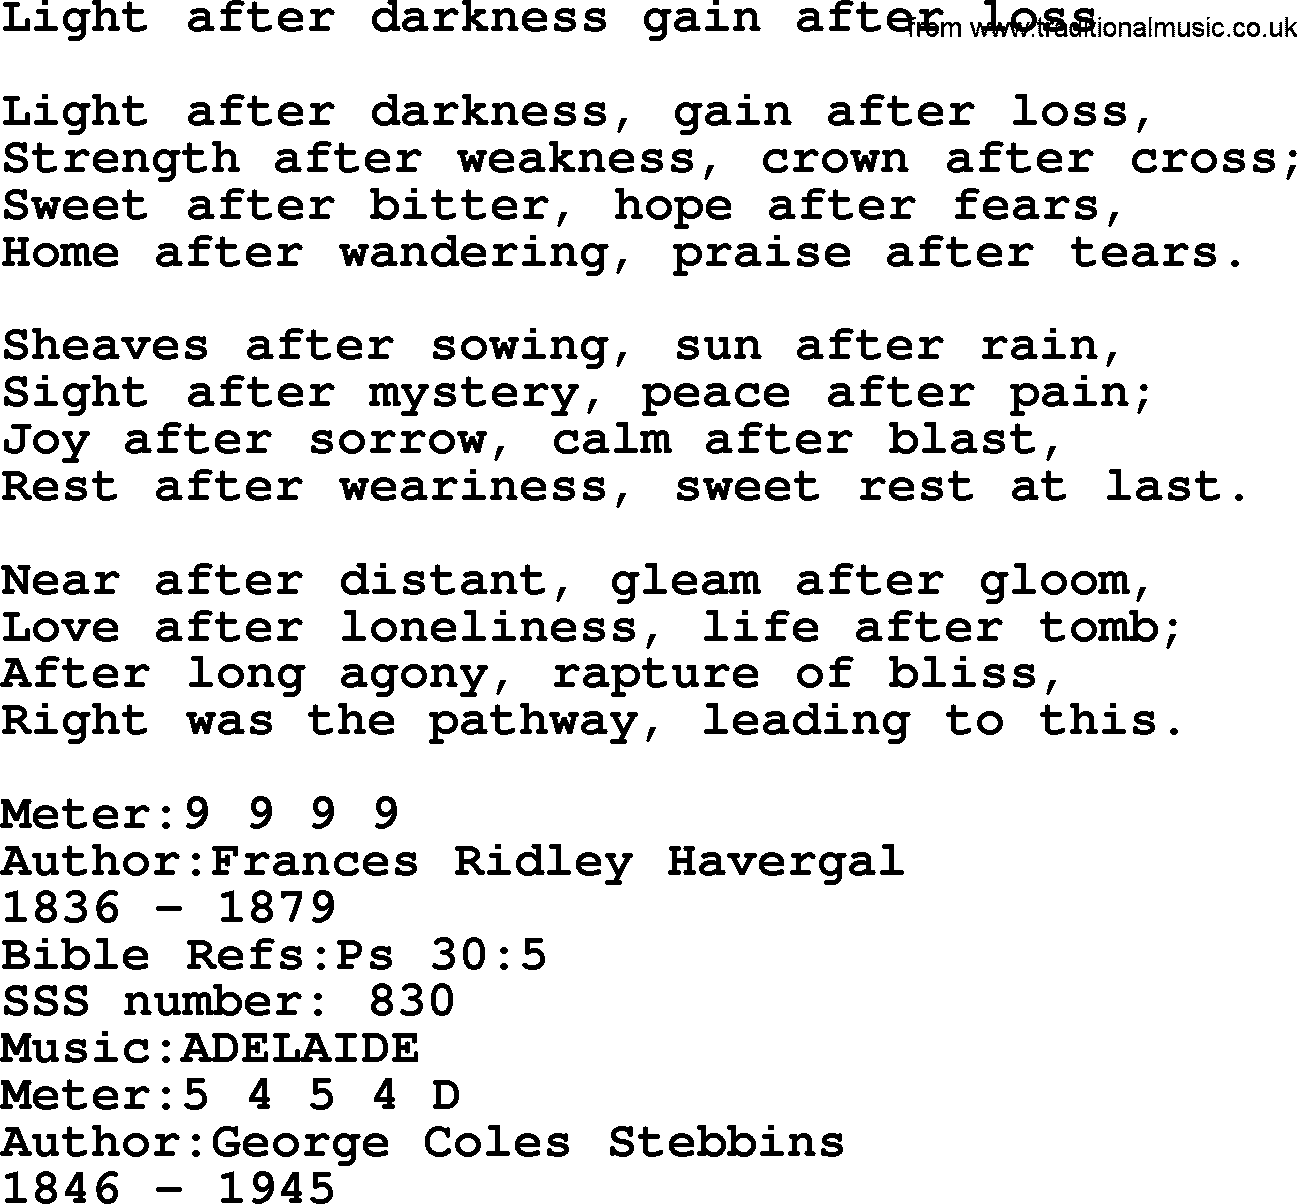 Sacred Songs and Solos complete, 1200 Hymns, title: Light After Darkness Gain After Loss, lyrics and PDF